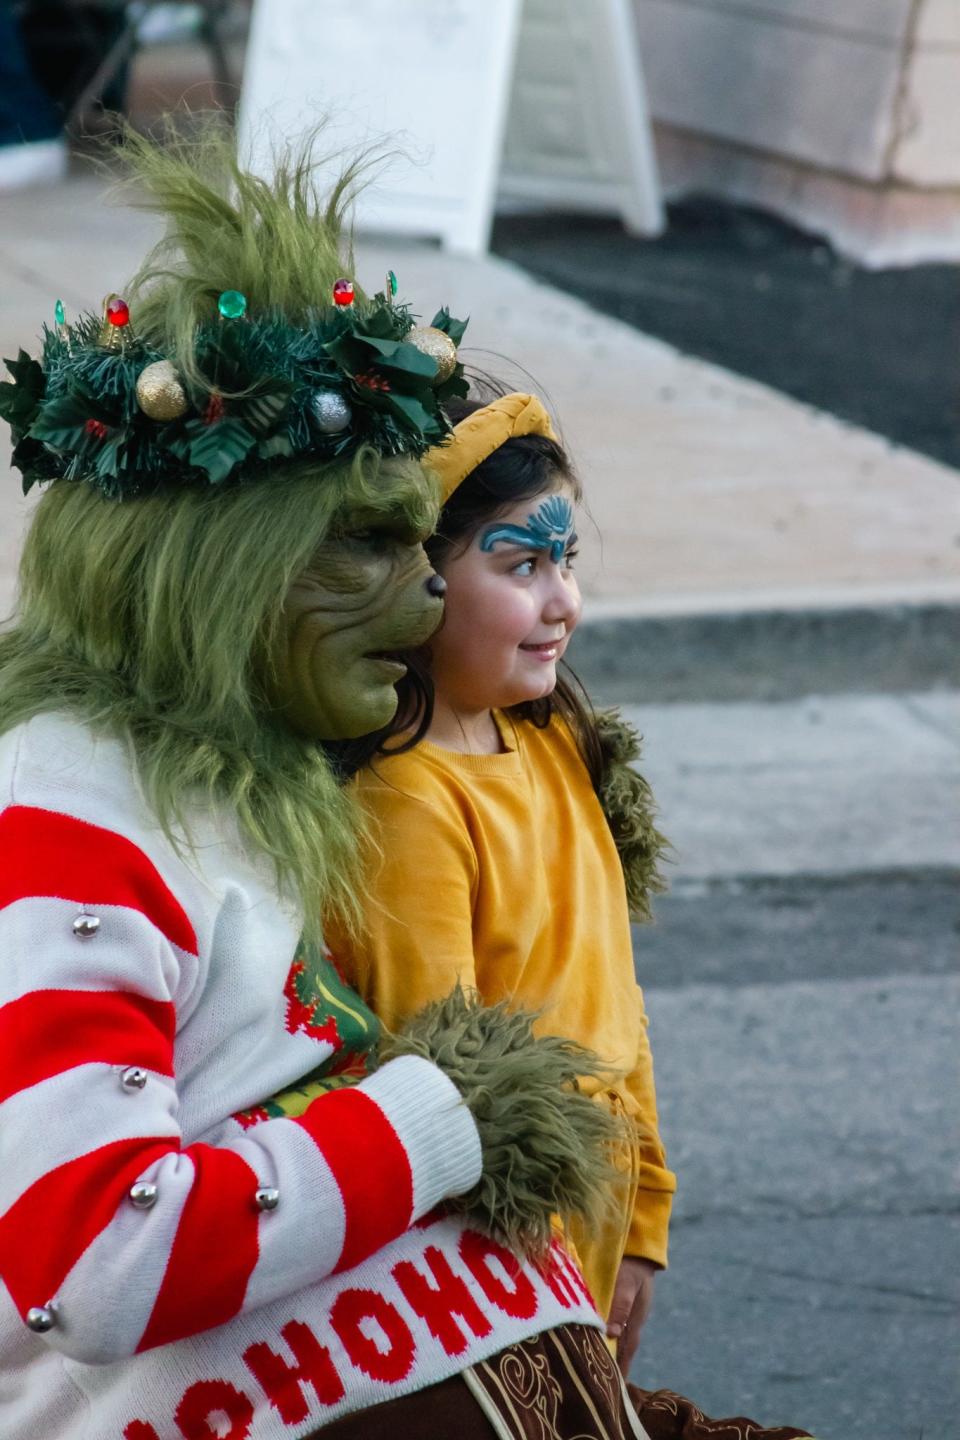 The Grinch greets guests at a previous Thanksmas Market and Holiday Celebration in downtown Fall River.